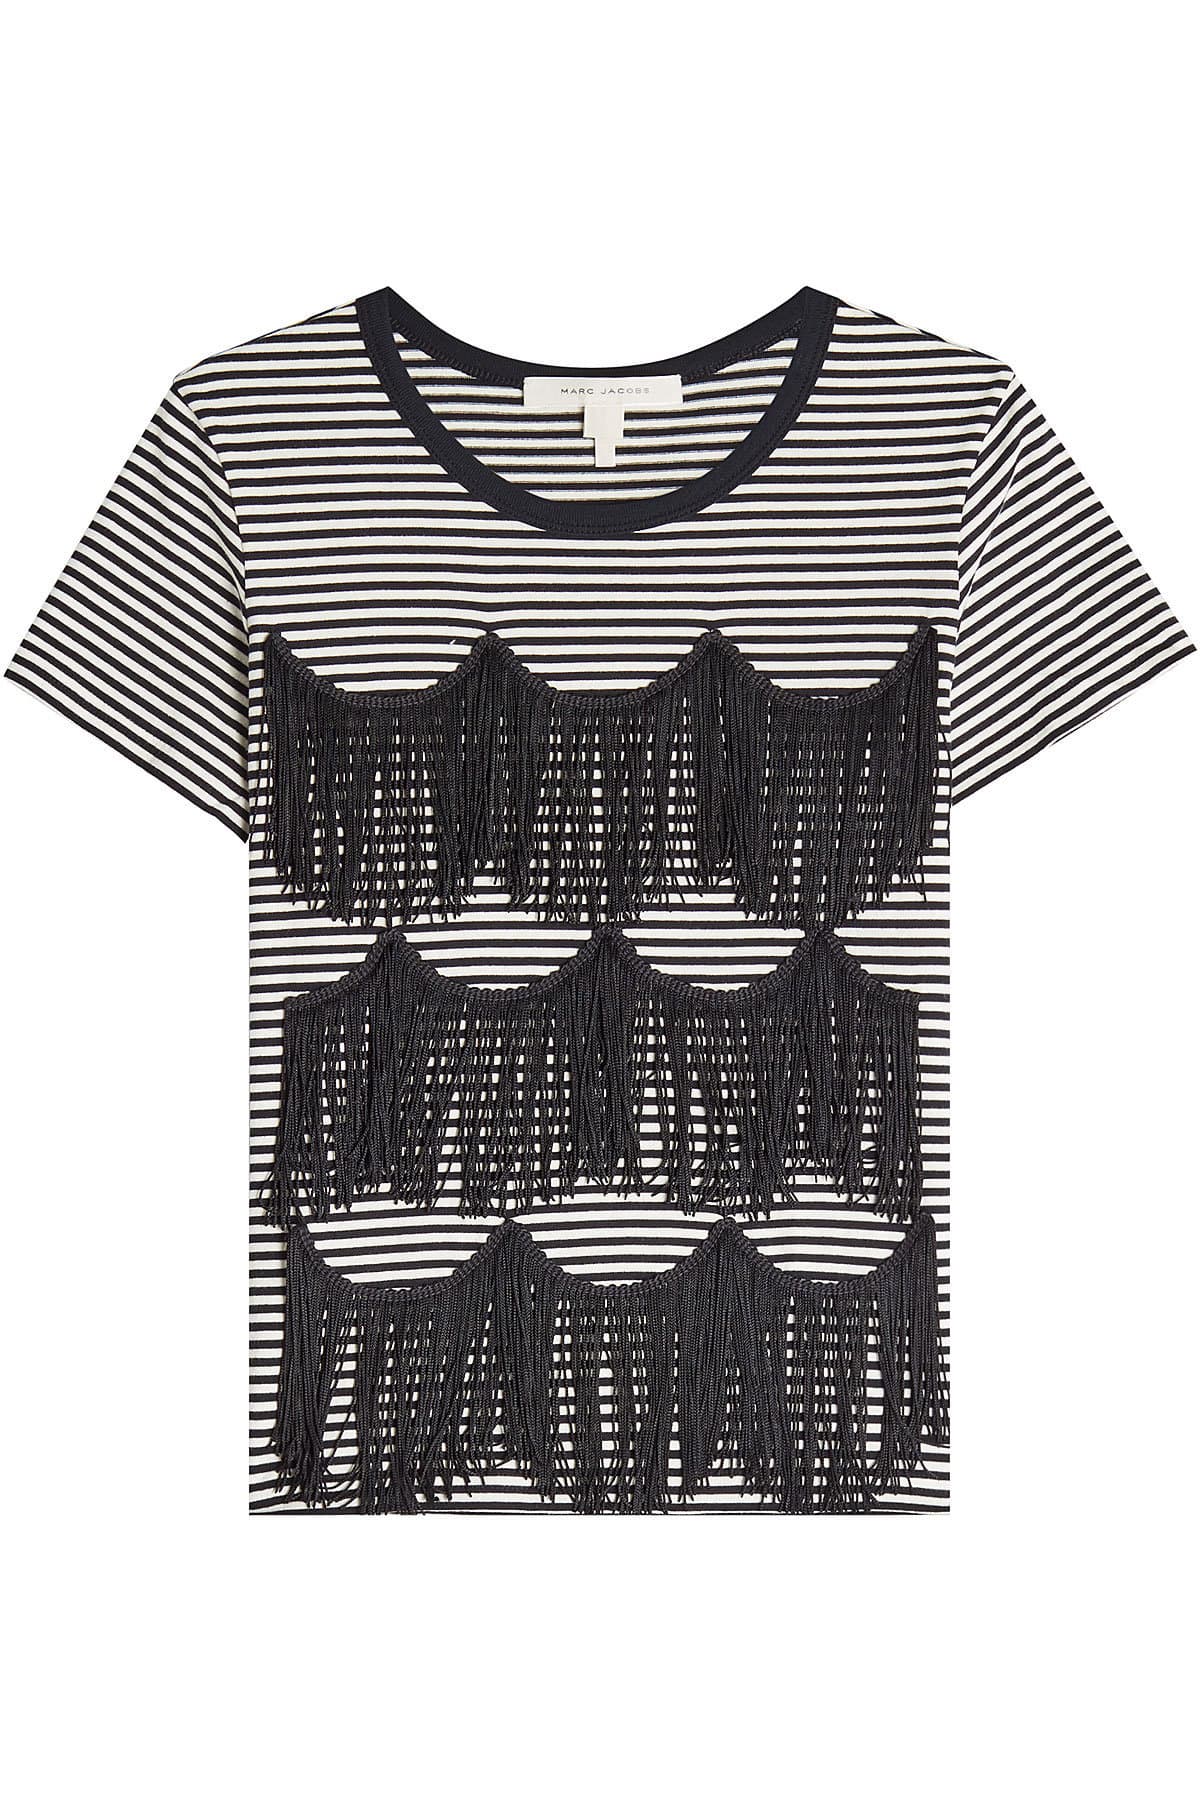 Striped Fringe Tee by Marc Jacobs